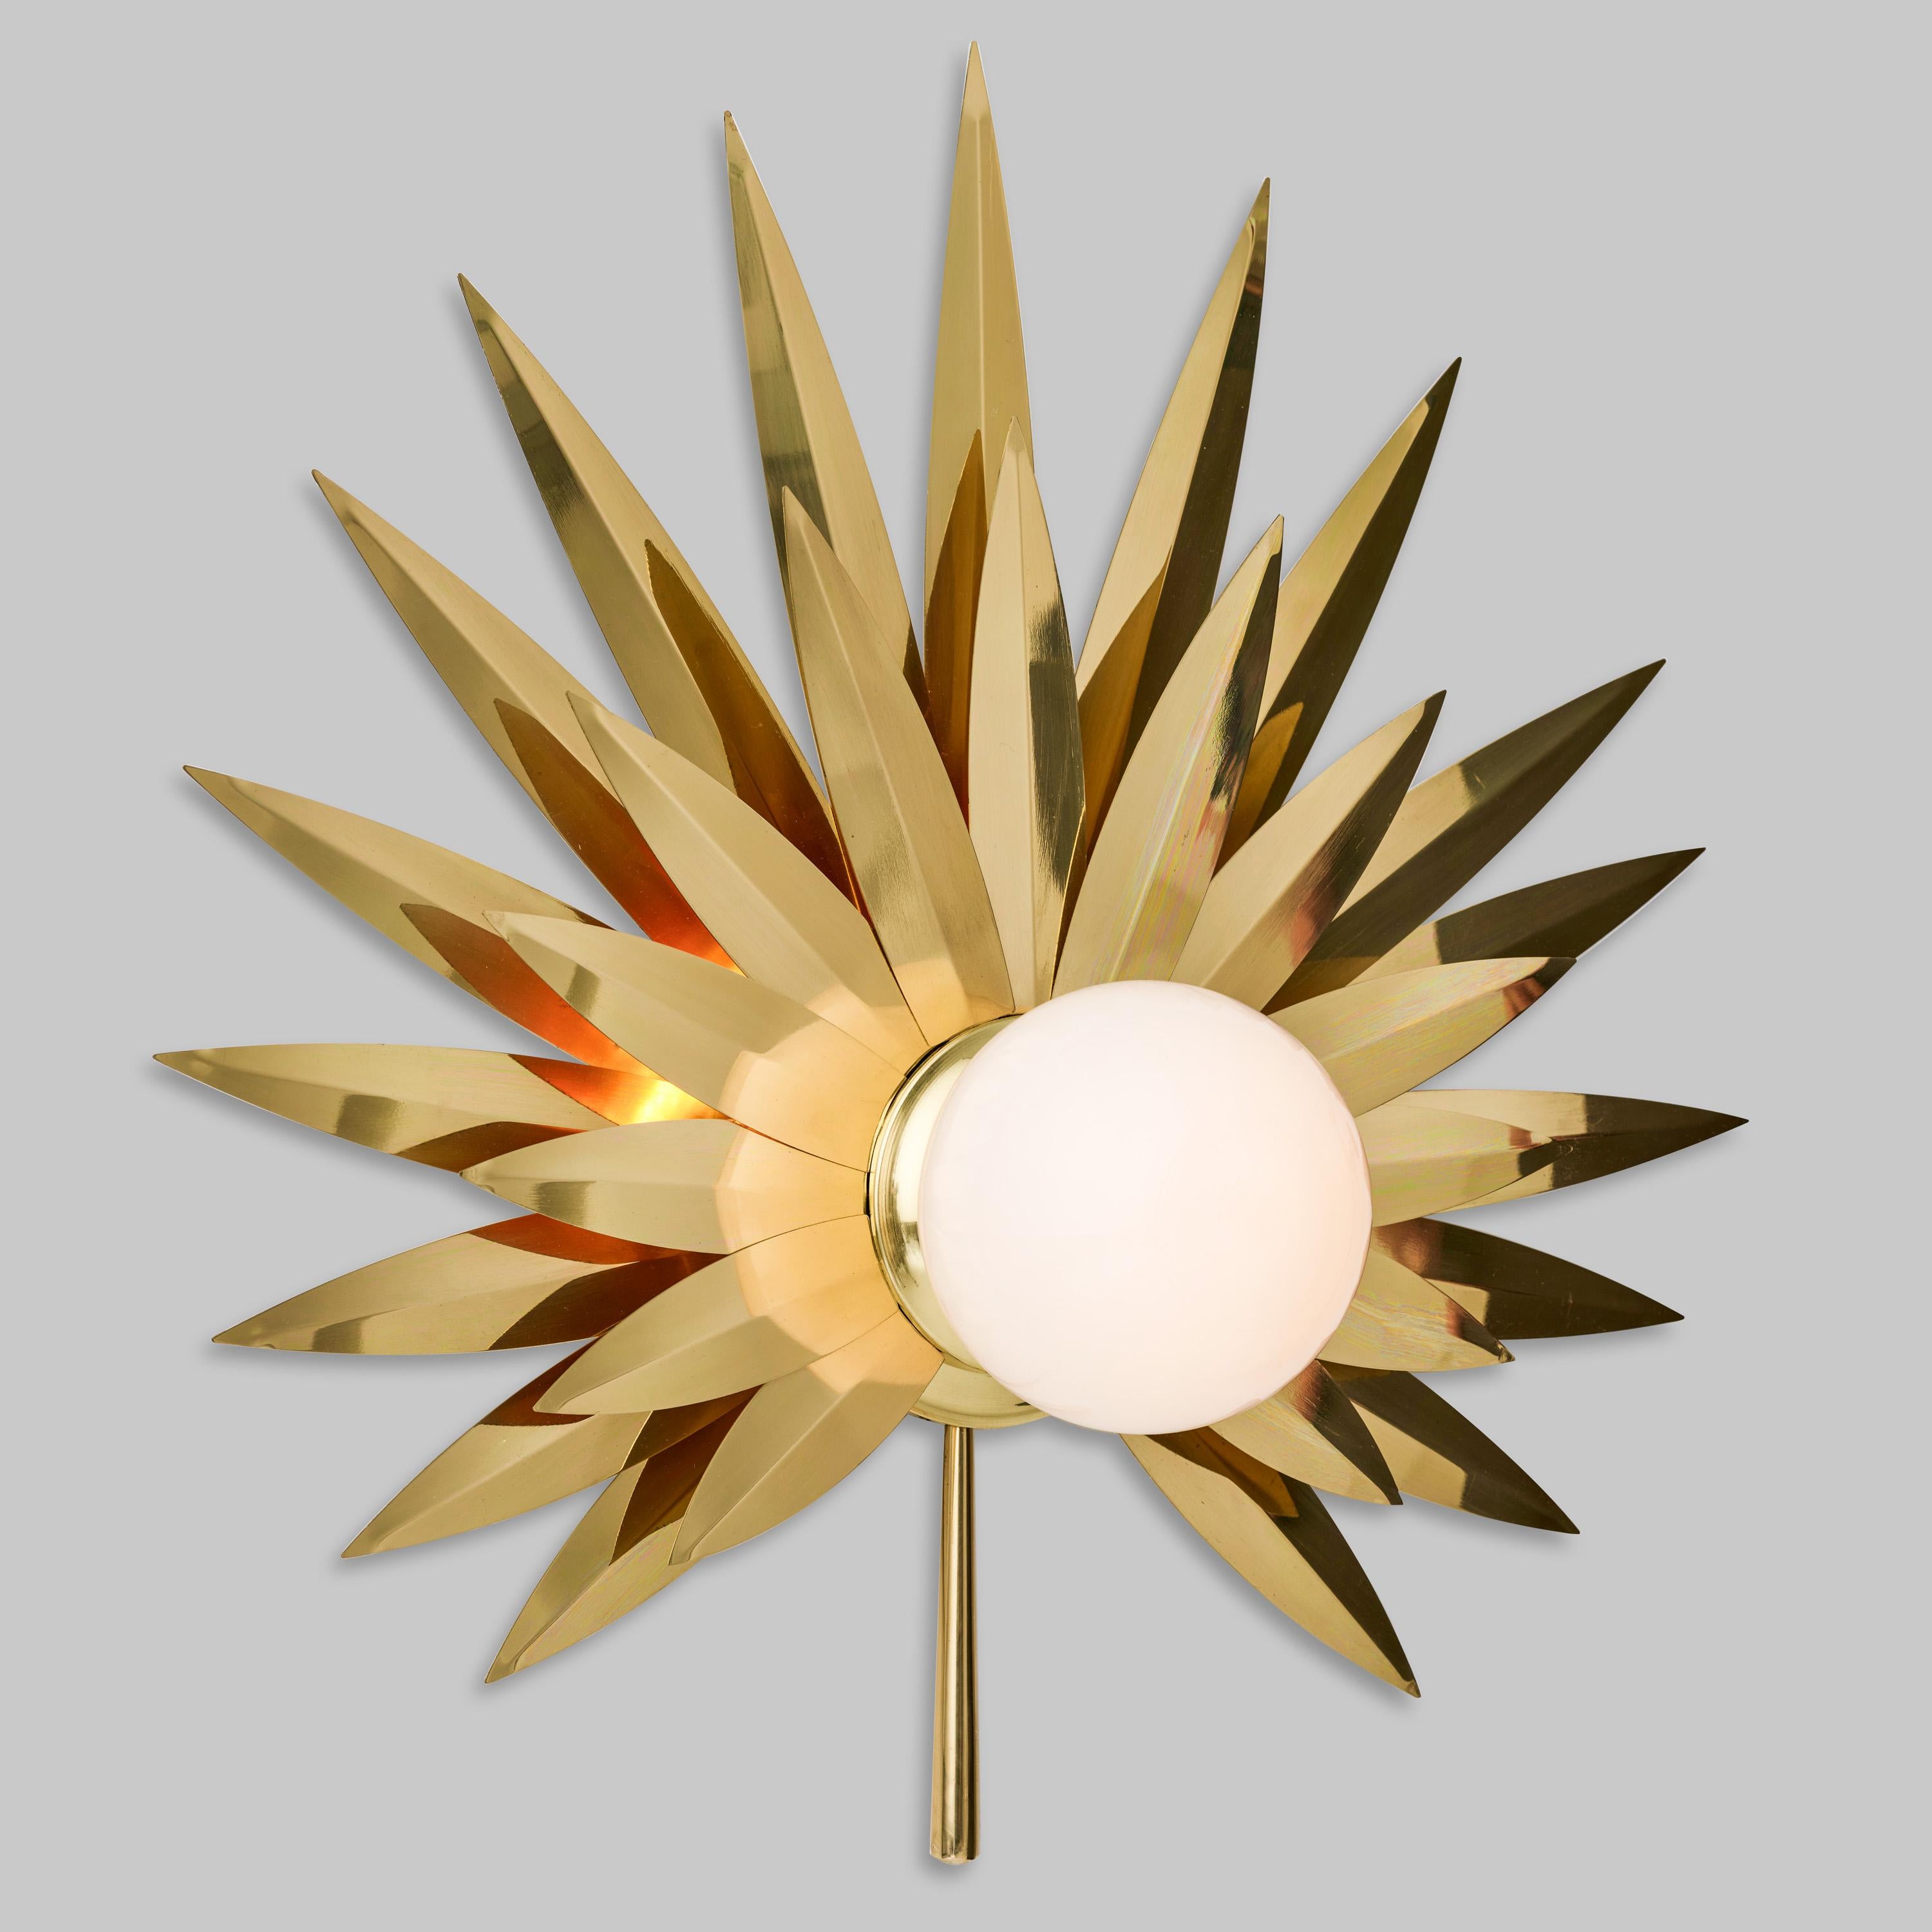 Contemporary Gold 21st Century Brass Hand-Crafted Palm Sconce Wall Light For Sale